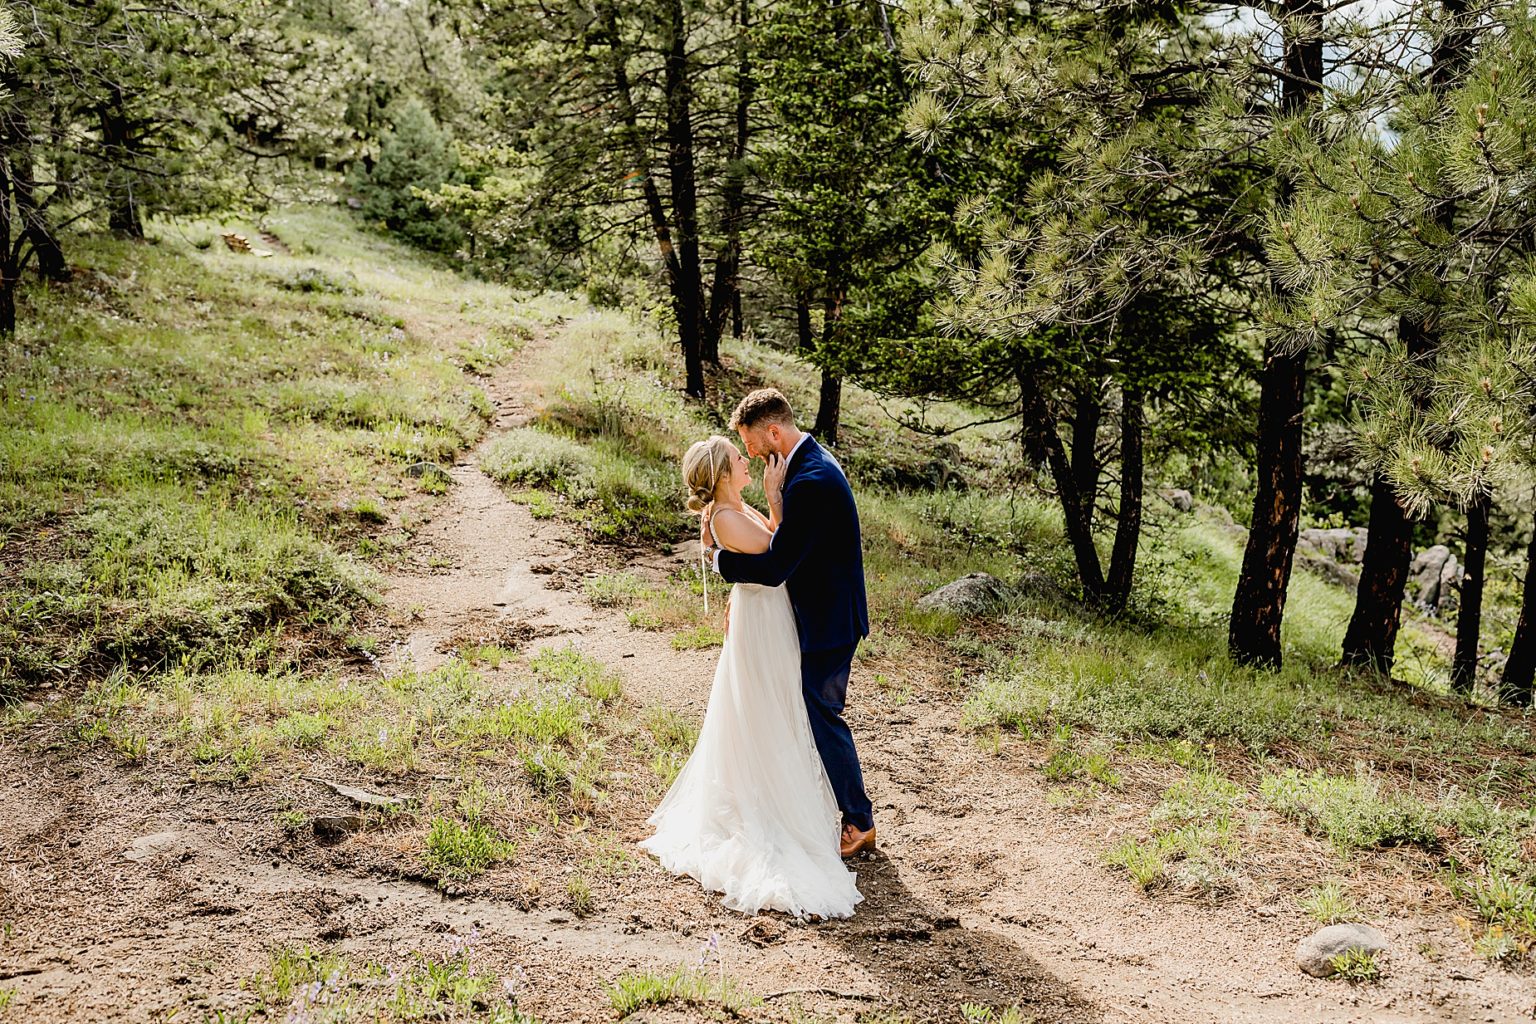 bride and groom embrace each other after their first look on wedding day in the trees of colorado